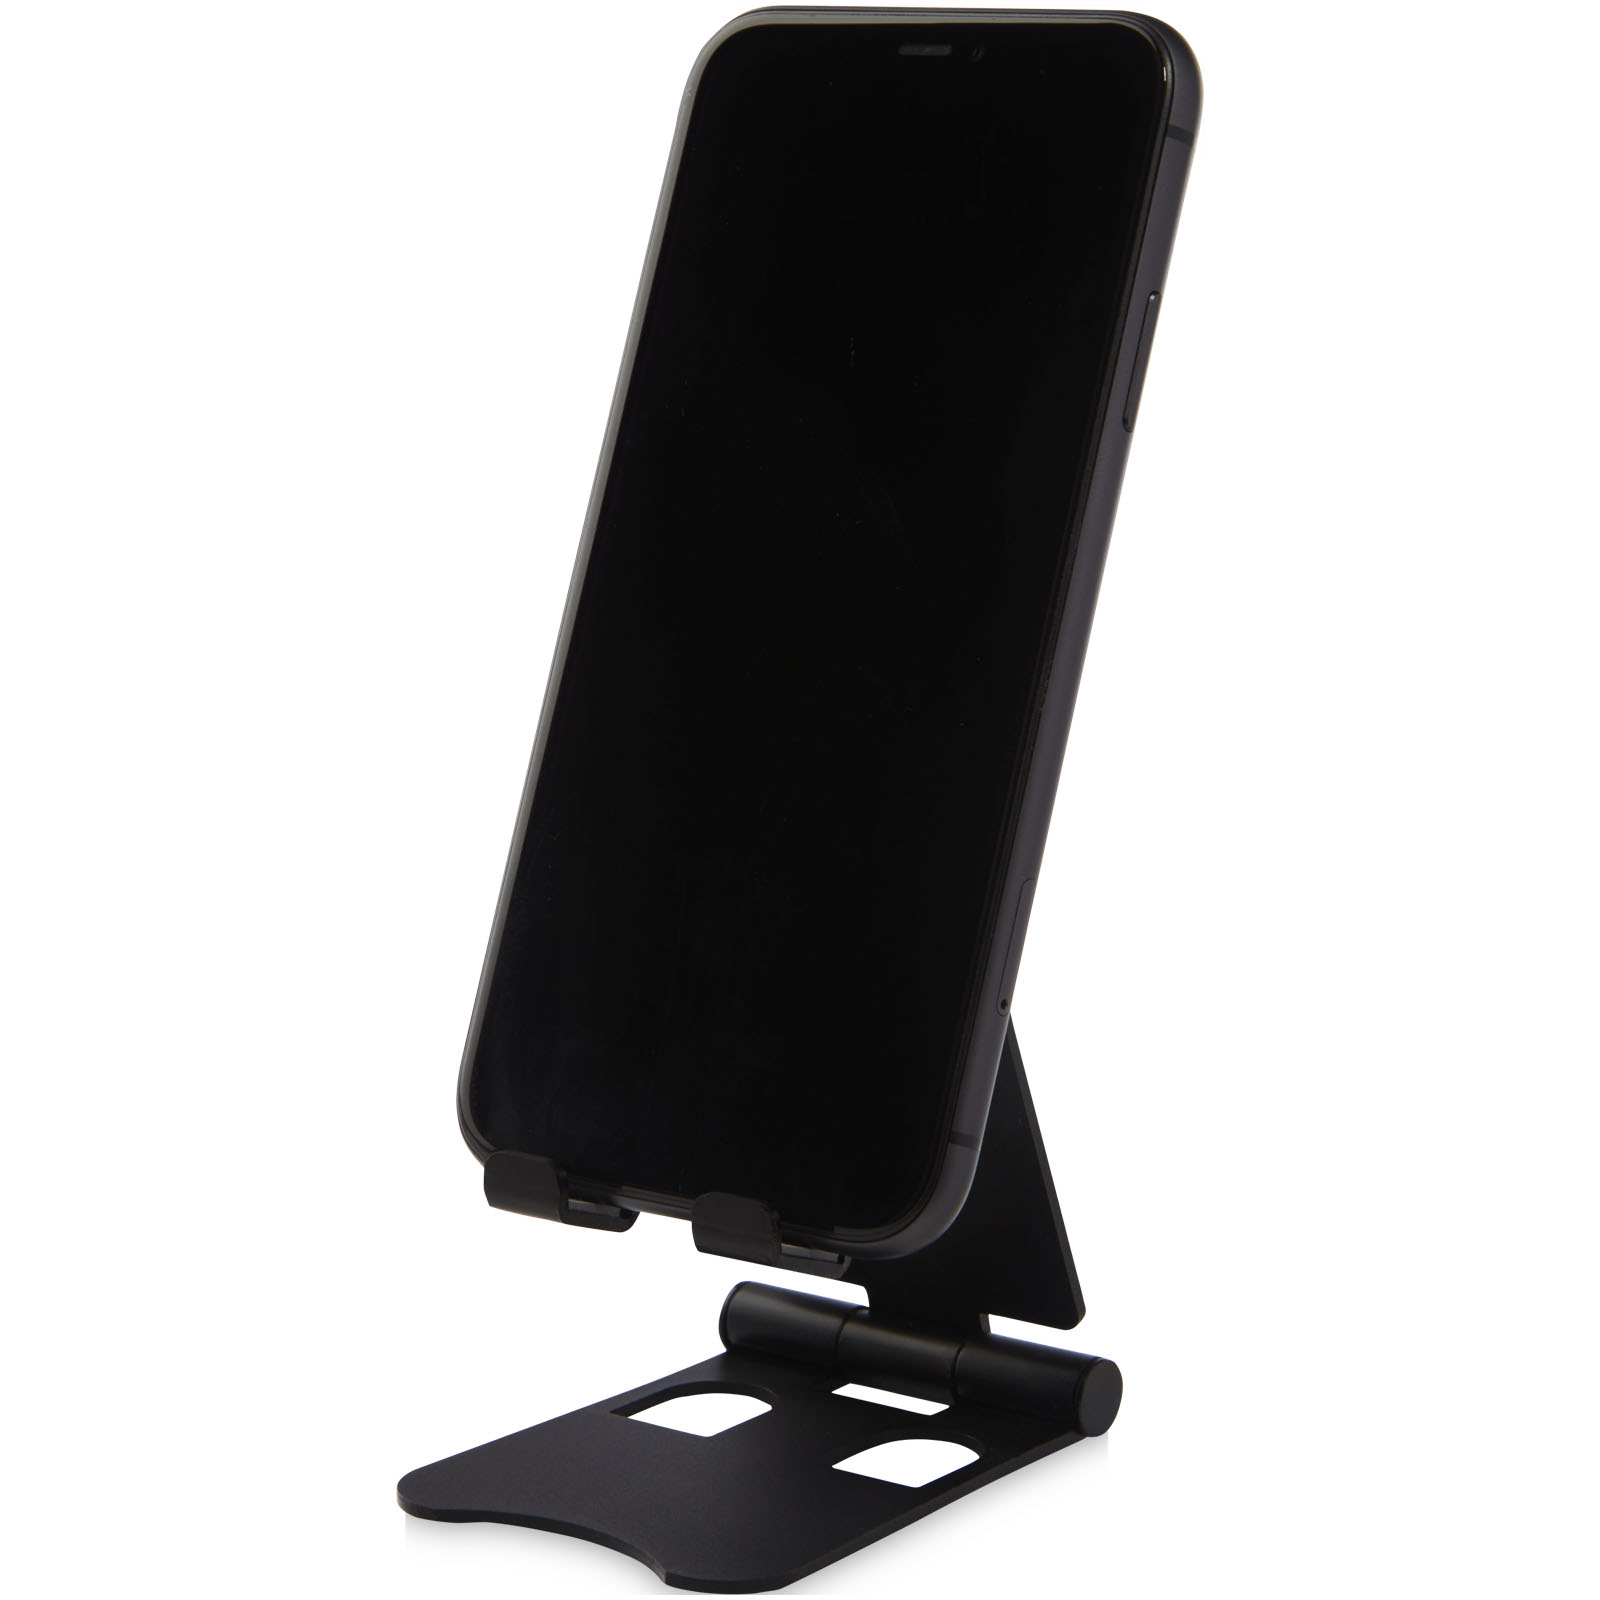 Advertising Stands & Holders - Rise foldable phone stand - 0